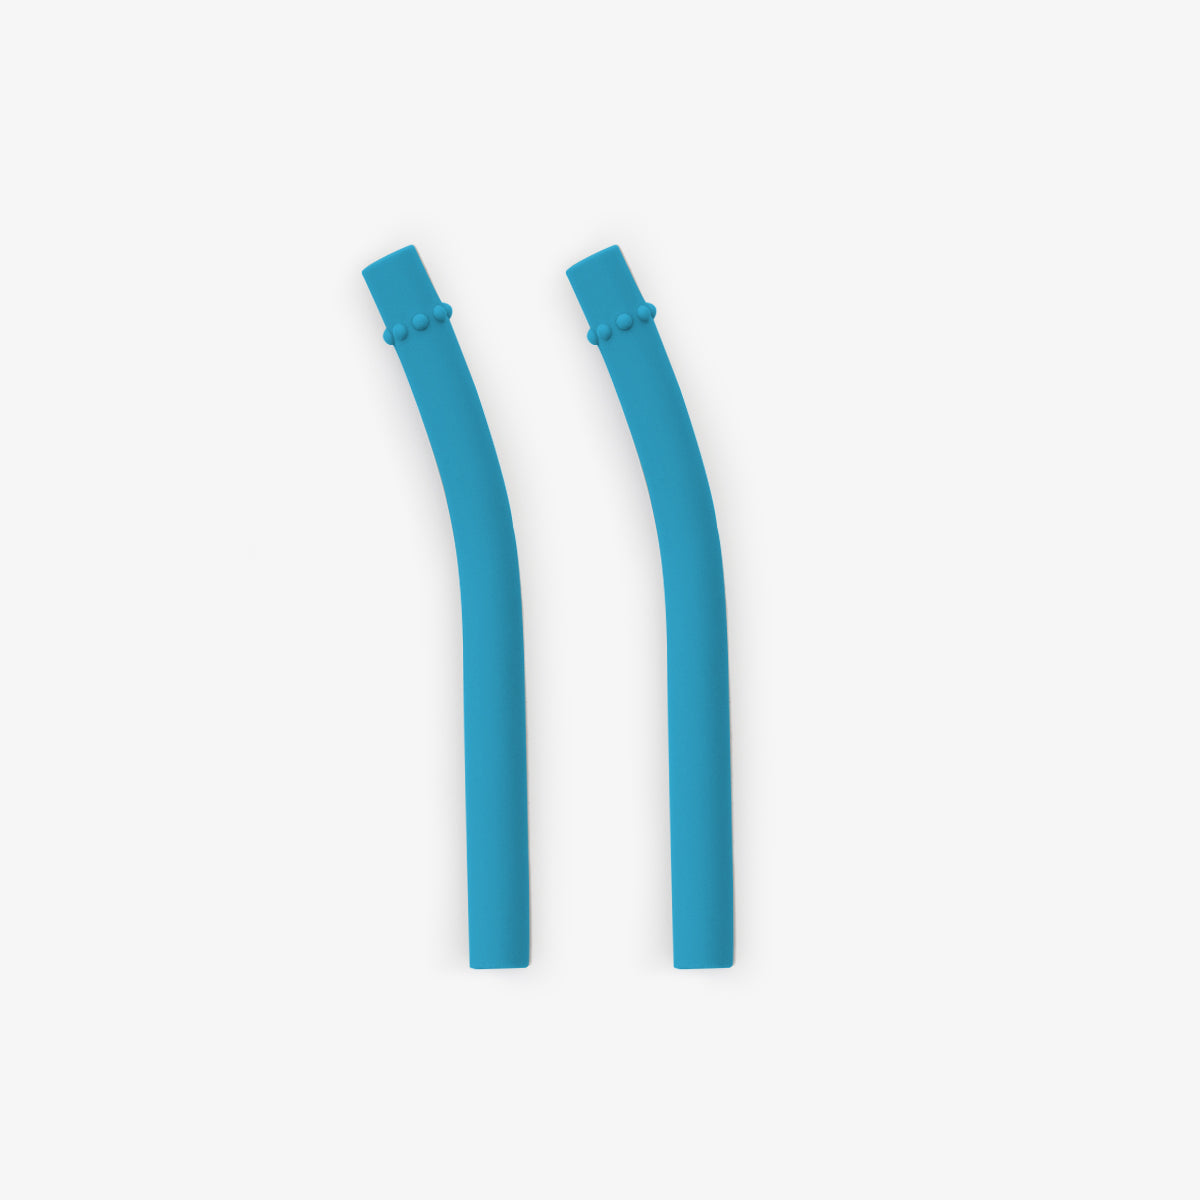 Mini Straws in Blue / Silicone Straw Replacement Pack for the ezpz Mini Cup & Straw System